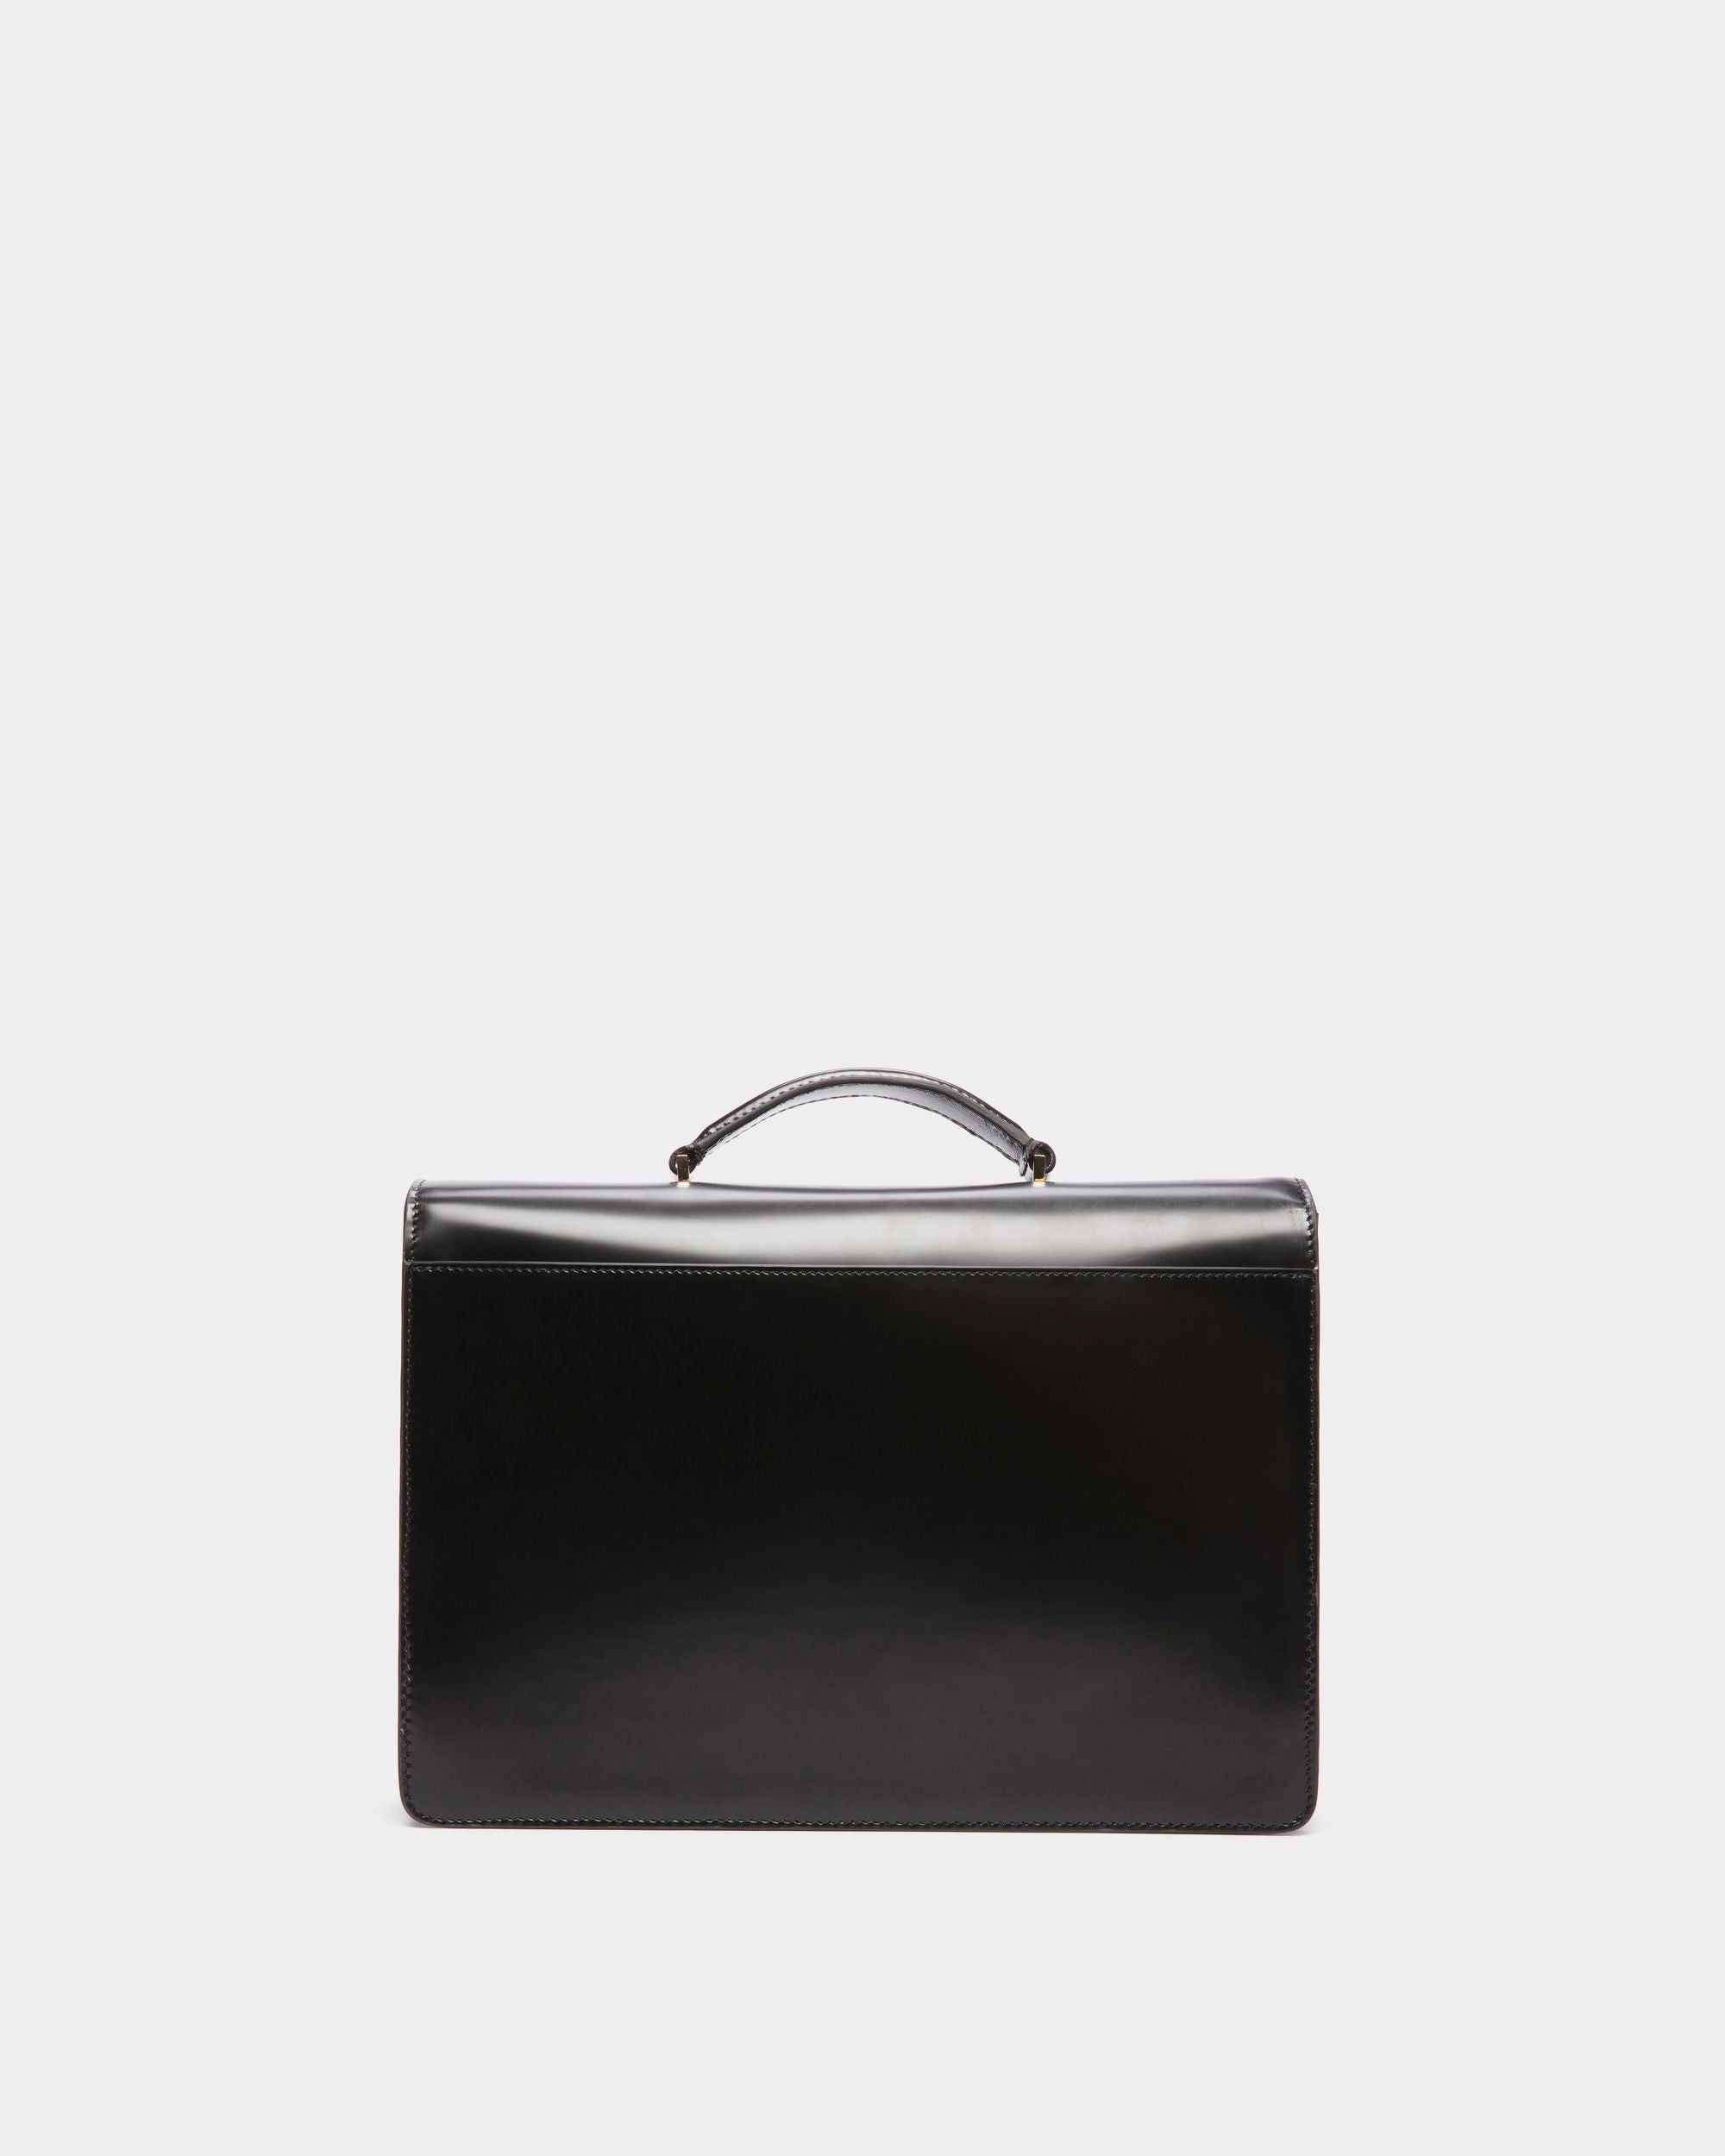 Ollam | Women's Top Handle Bag in Black Brushed Leather | Bally | Still Life Back